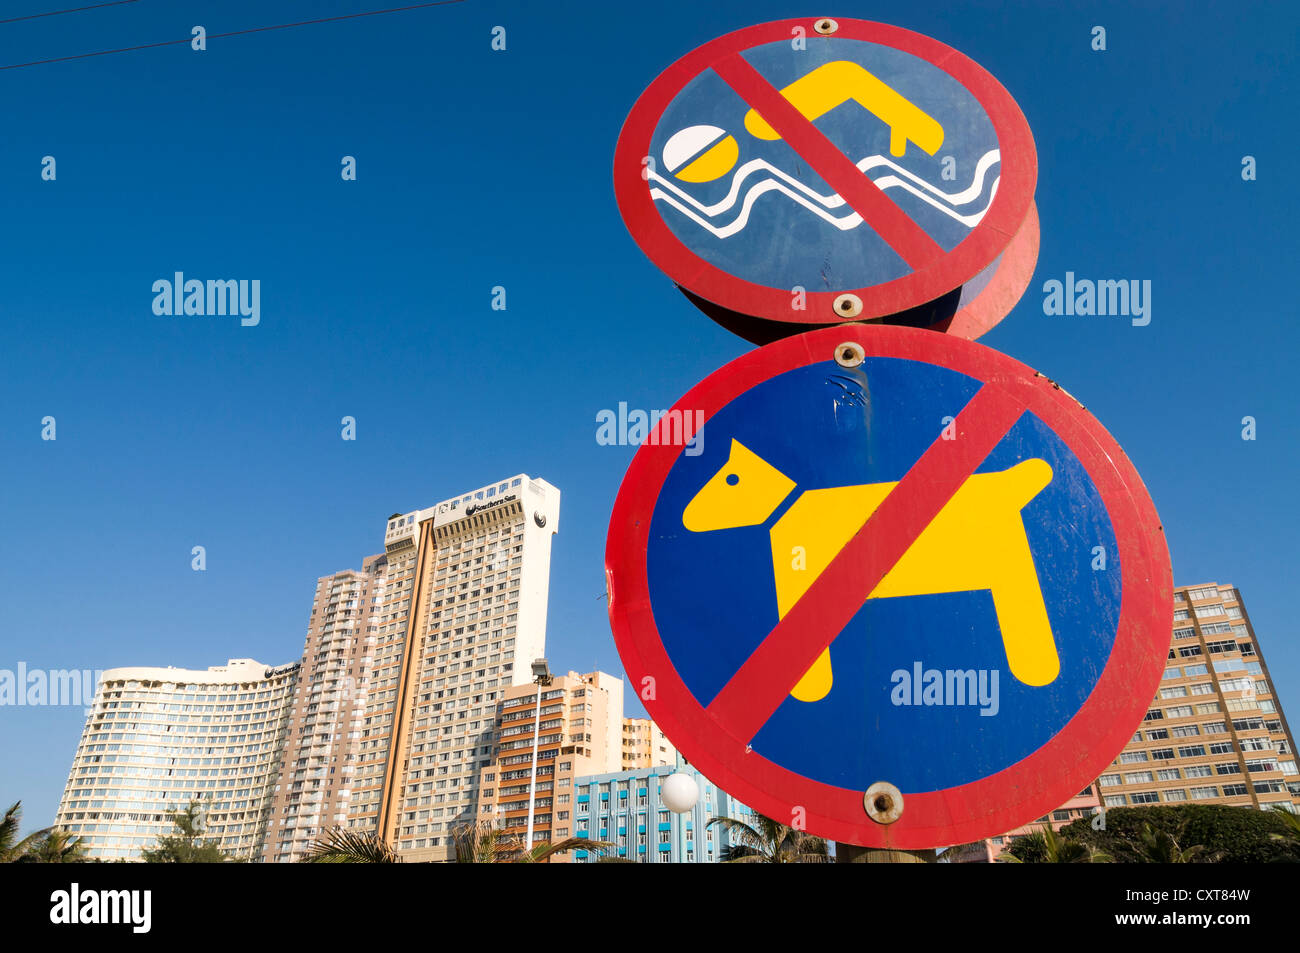 Street signs, pictograms of a swimmer and a dog, Durban, KwaZulu-Natal, South Africa, Africa Stock Photo